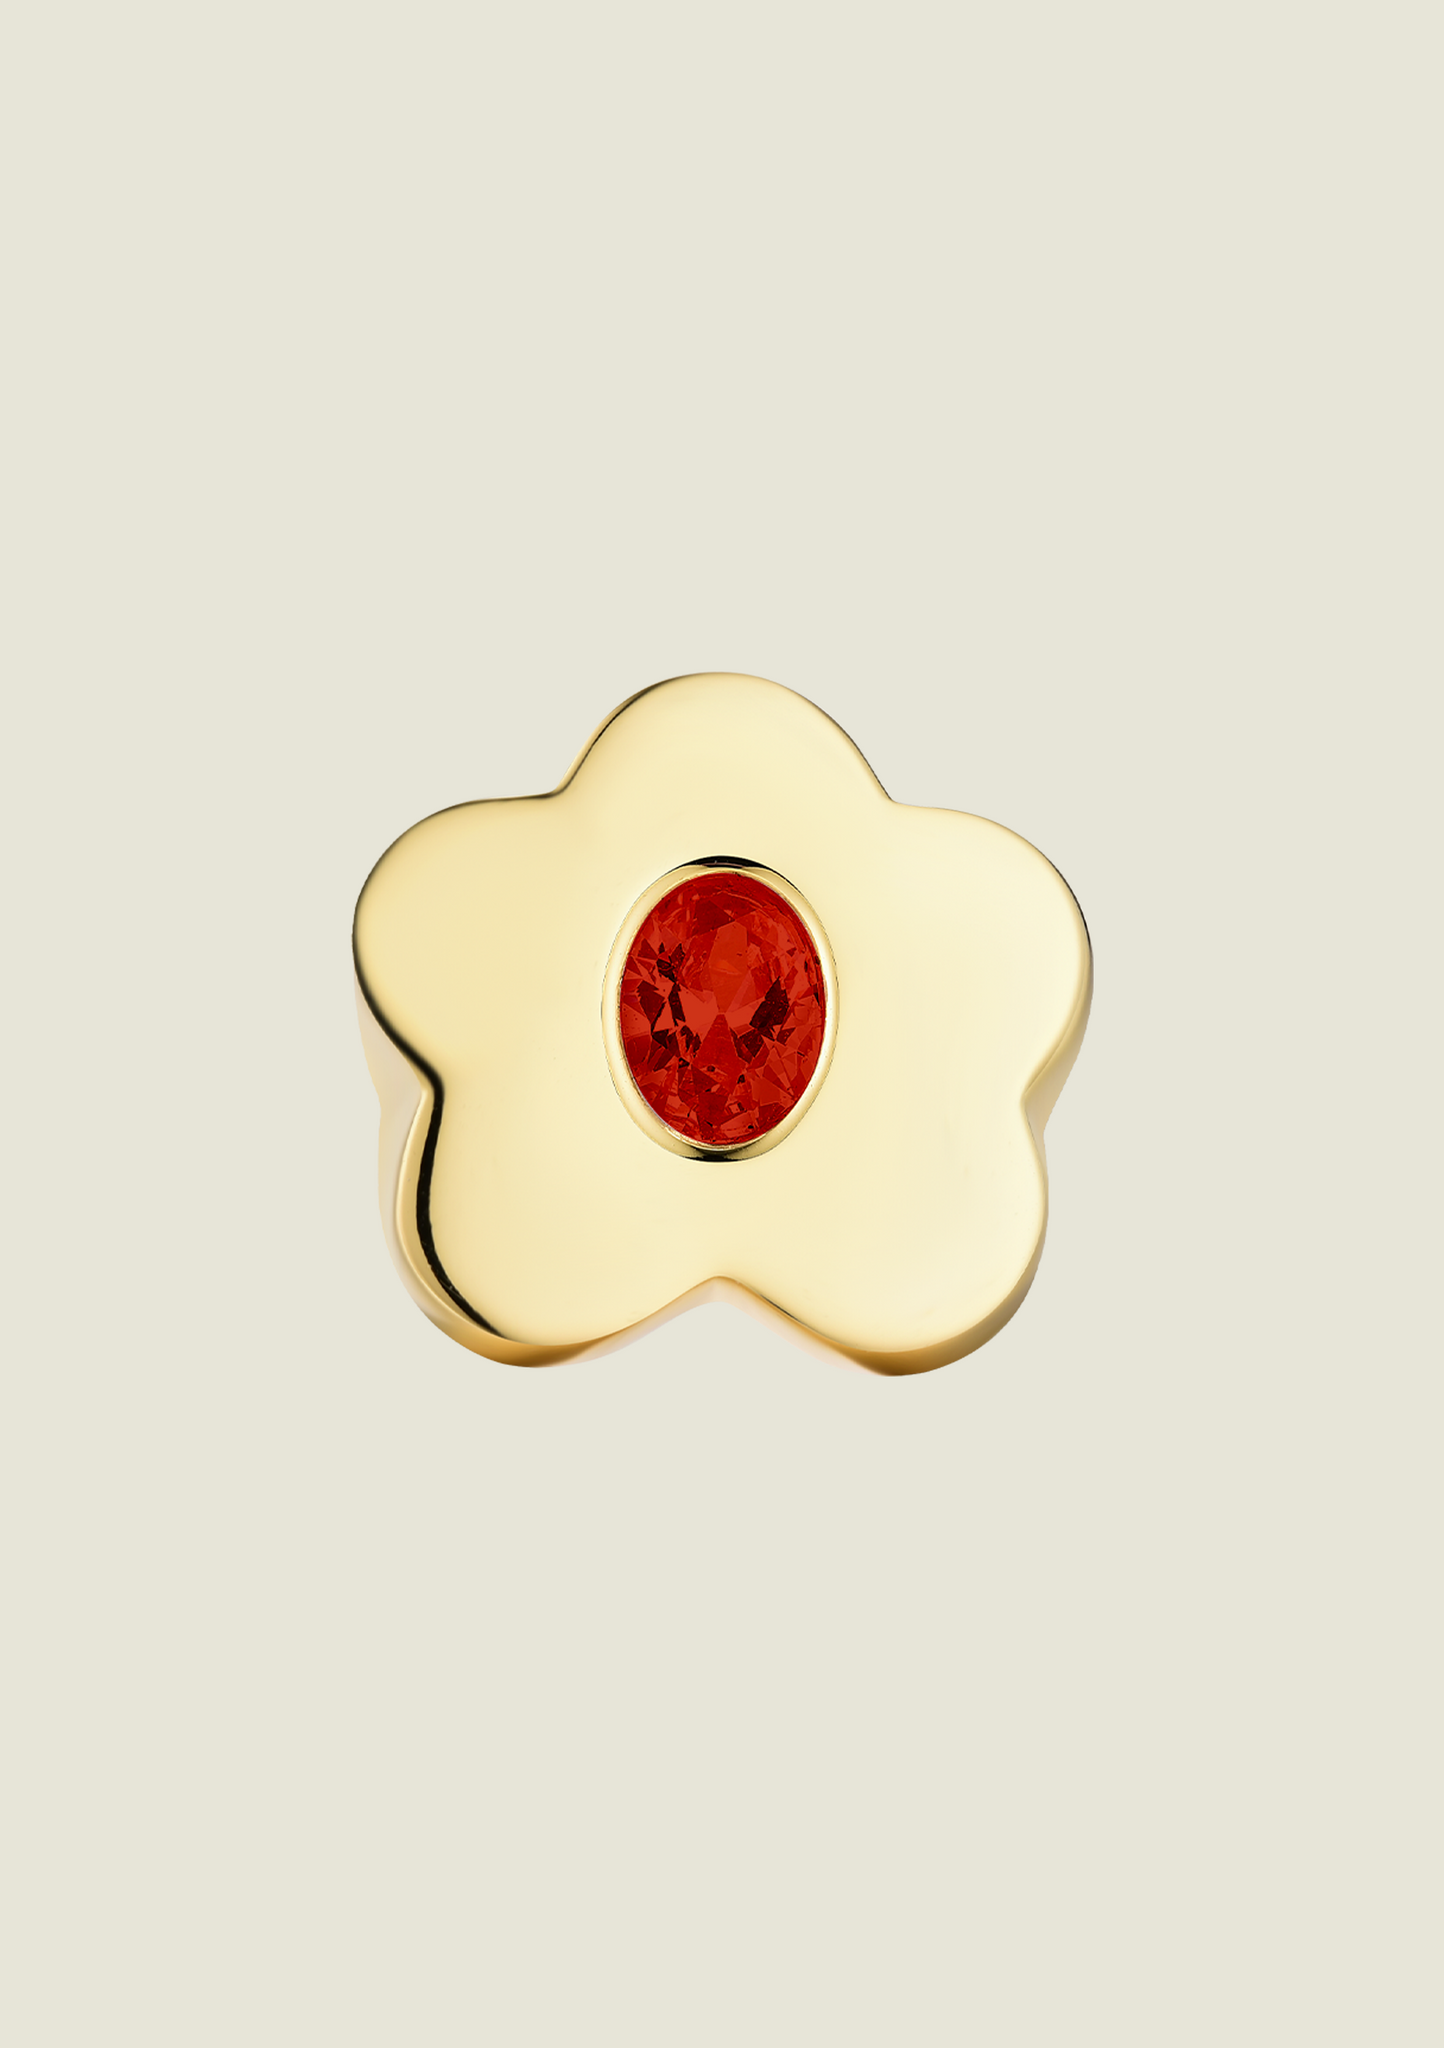 Gold / Red Apple